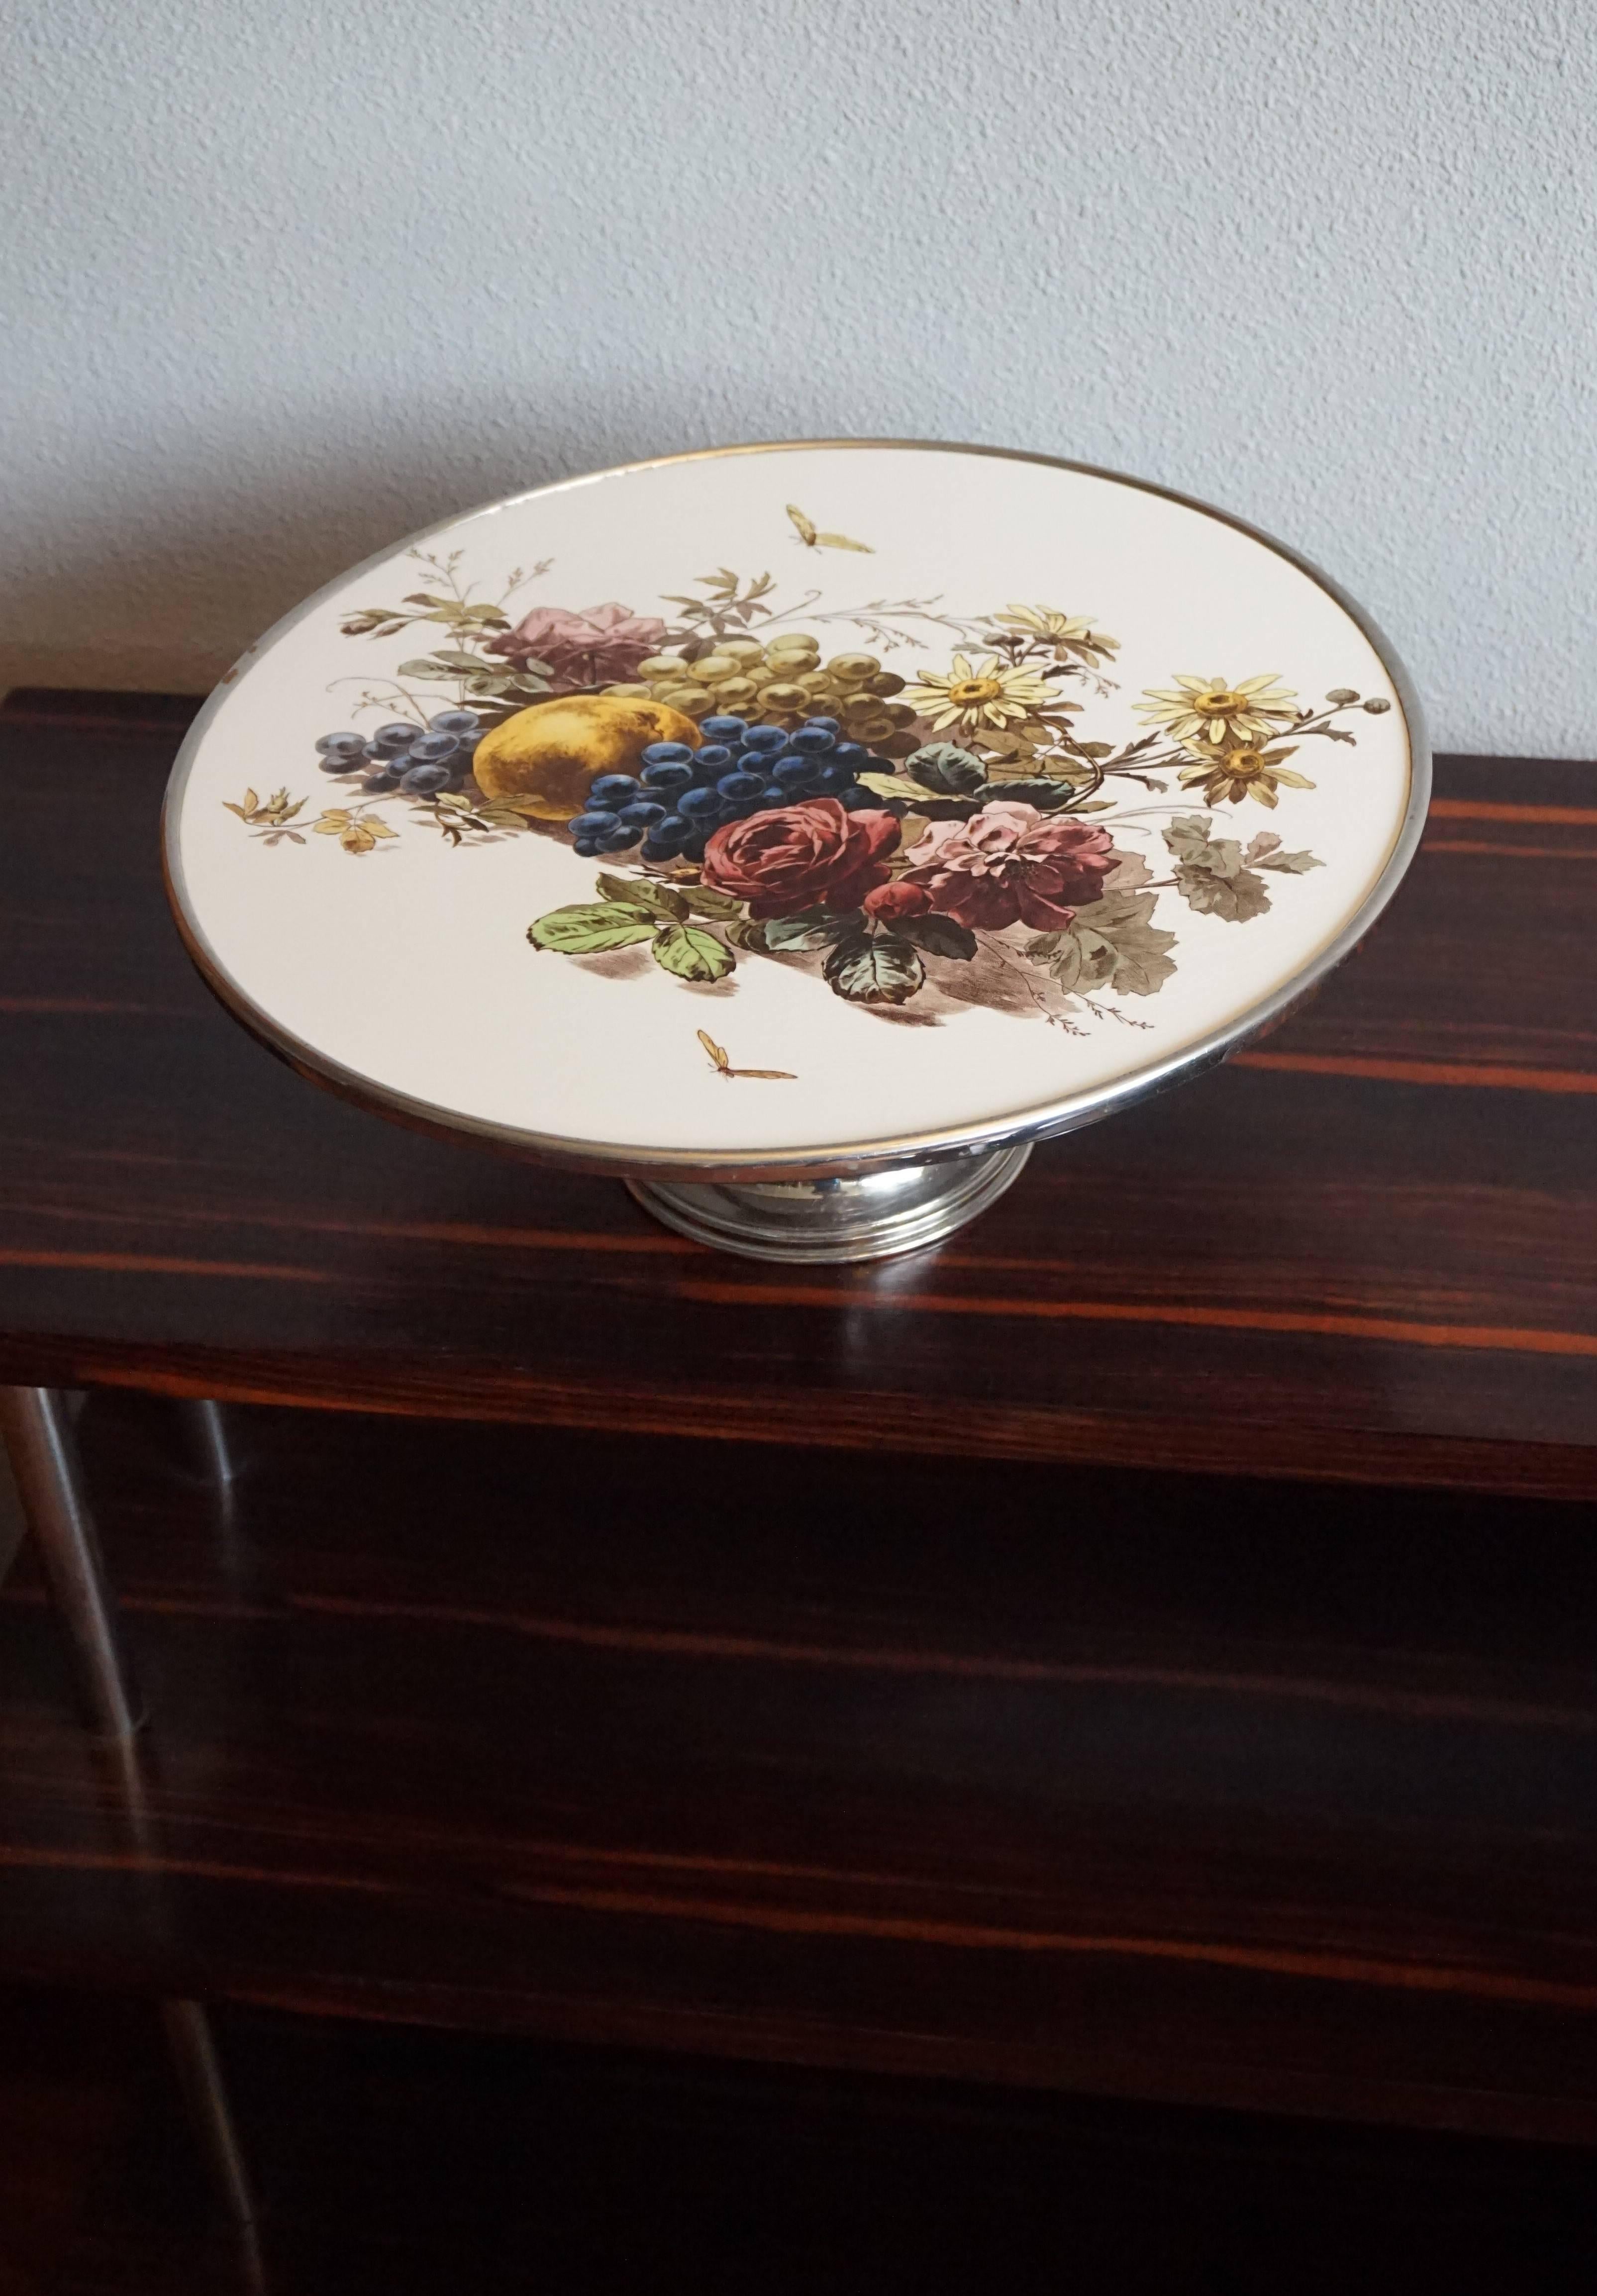 Handcrafted 1920s pie stand with beautiful decor.

This stylish and decorative pie stand from the 1920s is in very good condition. The shape of this wonderful stand is a joy to look at and the stunning decor of fruits and flowers really takes it to